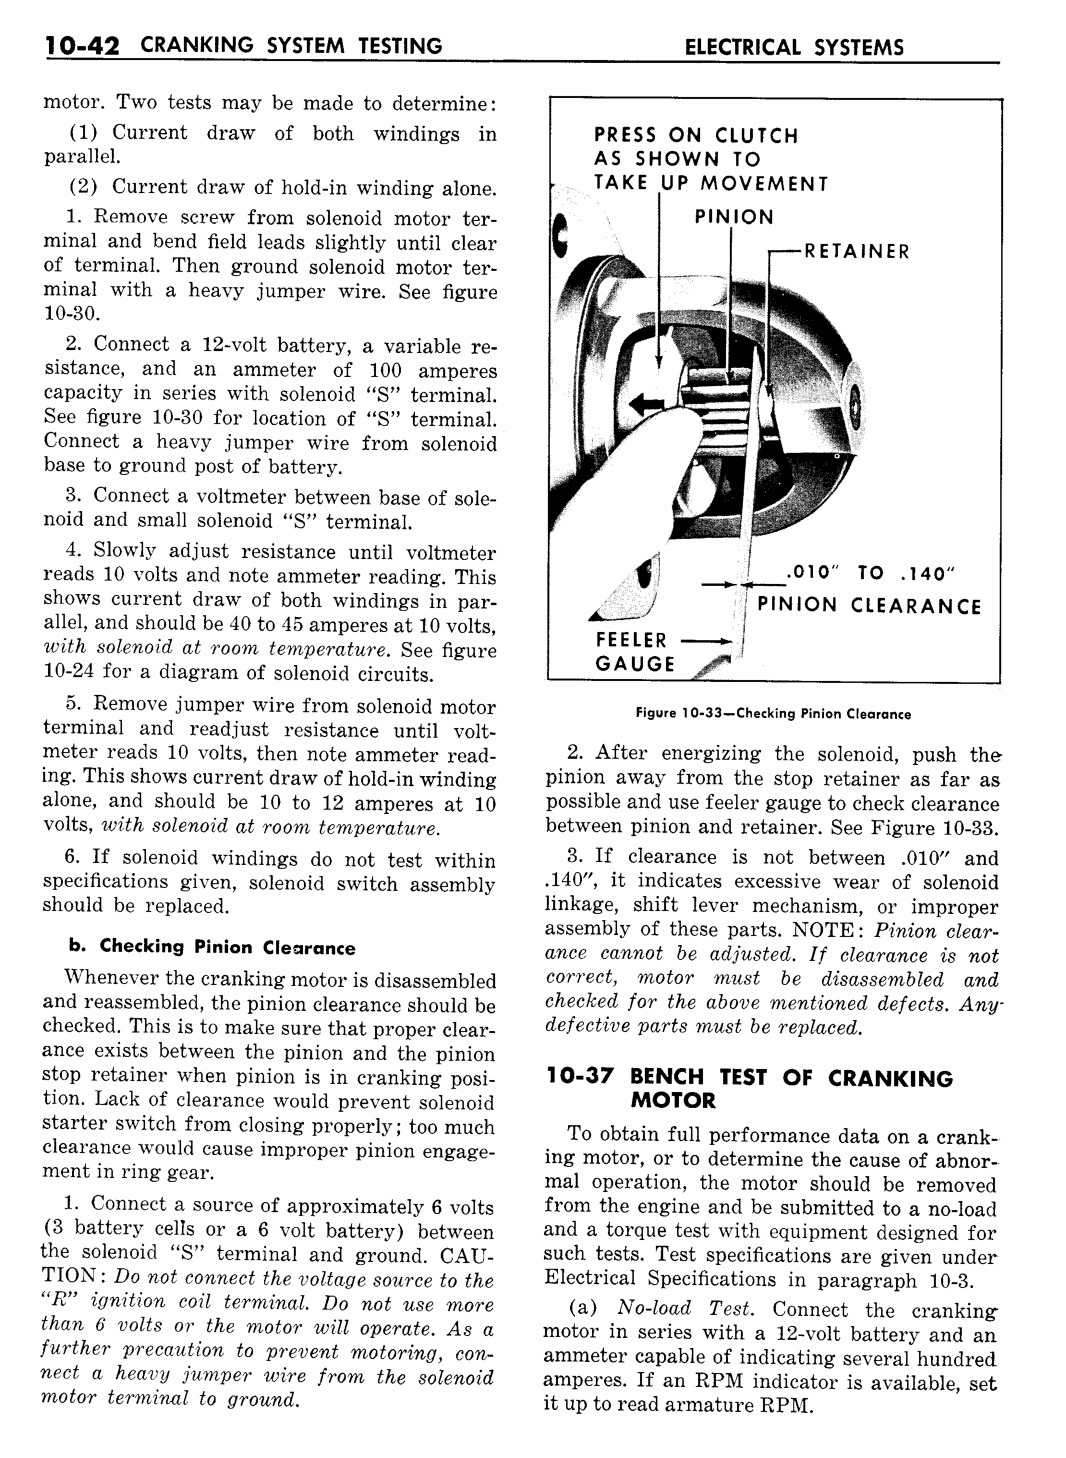 n_11 1957 Buick Shop Manual - Electrical Systems-042-042.jpg